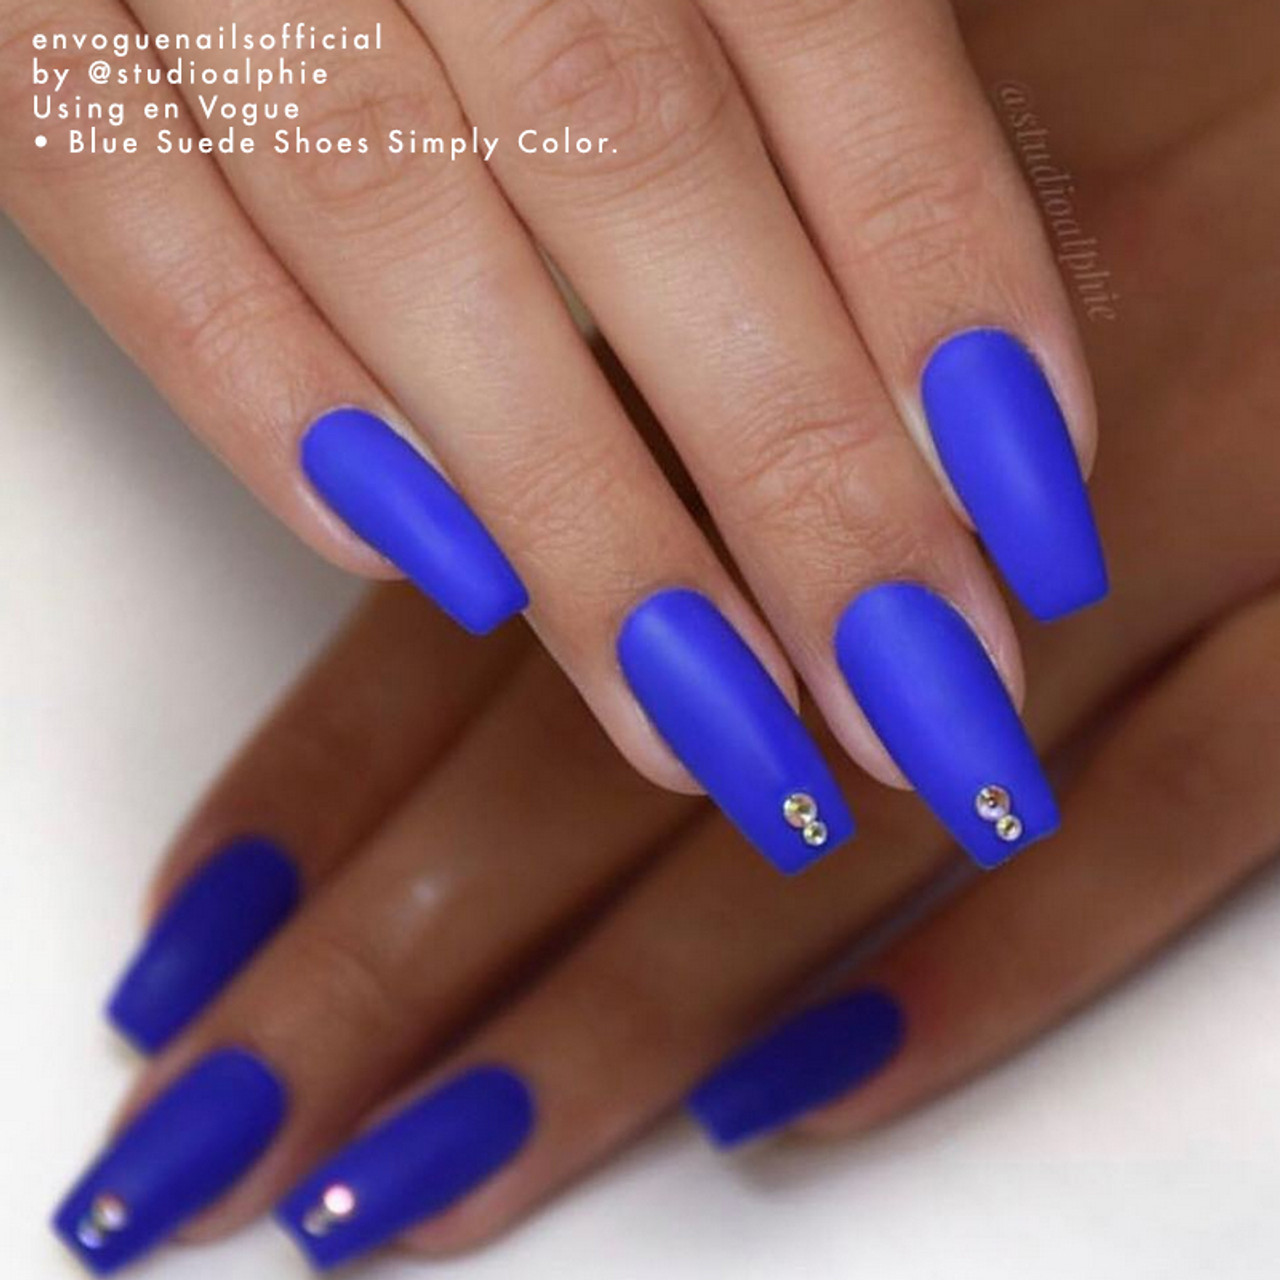 Simply Coloured UV/LED Nail Gel (Hard Gel) 5ml - Blue Suede Shoes